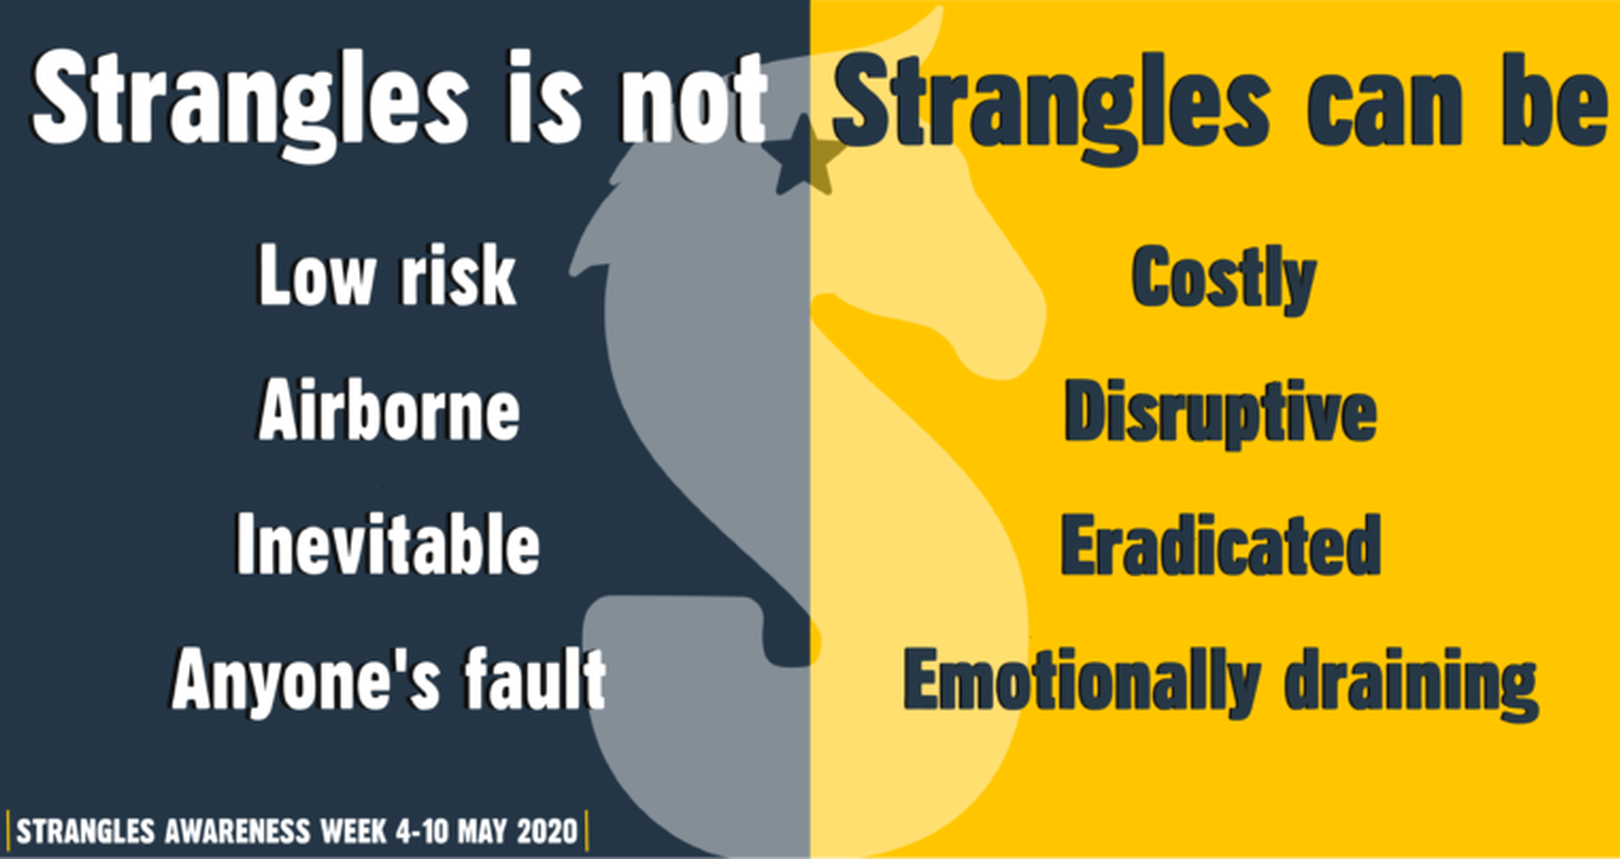 What is strangles?